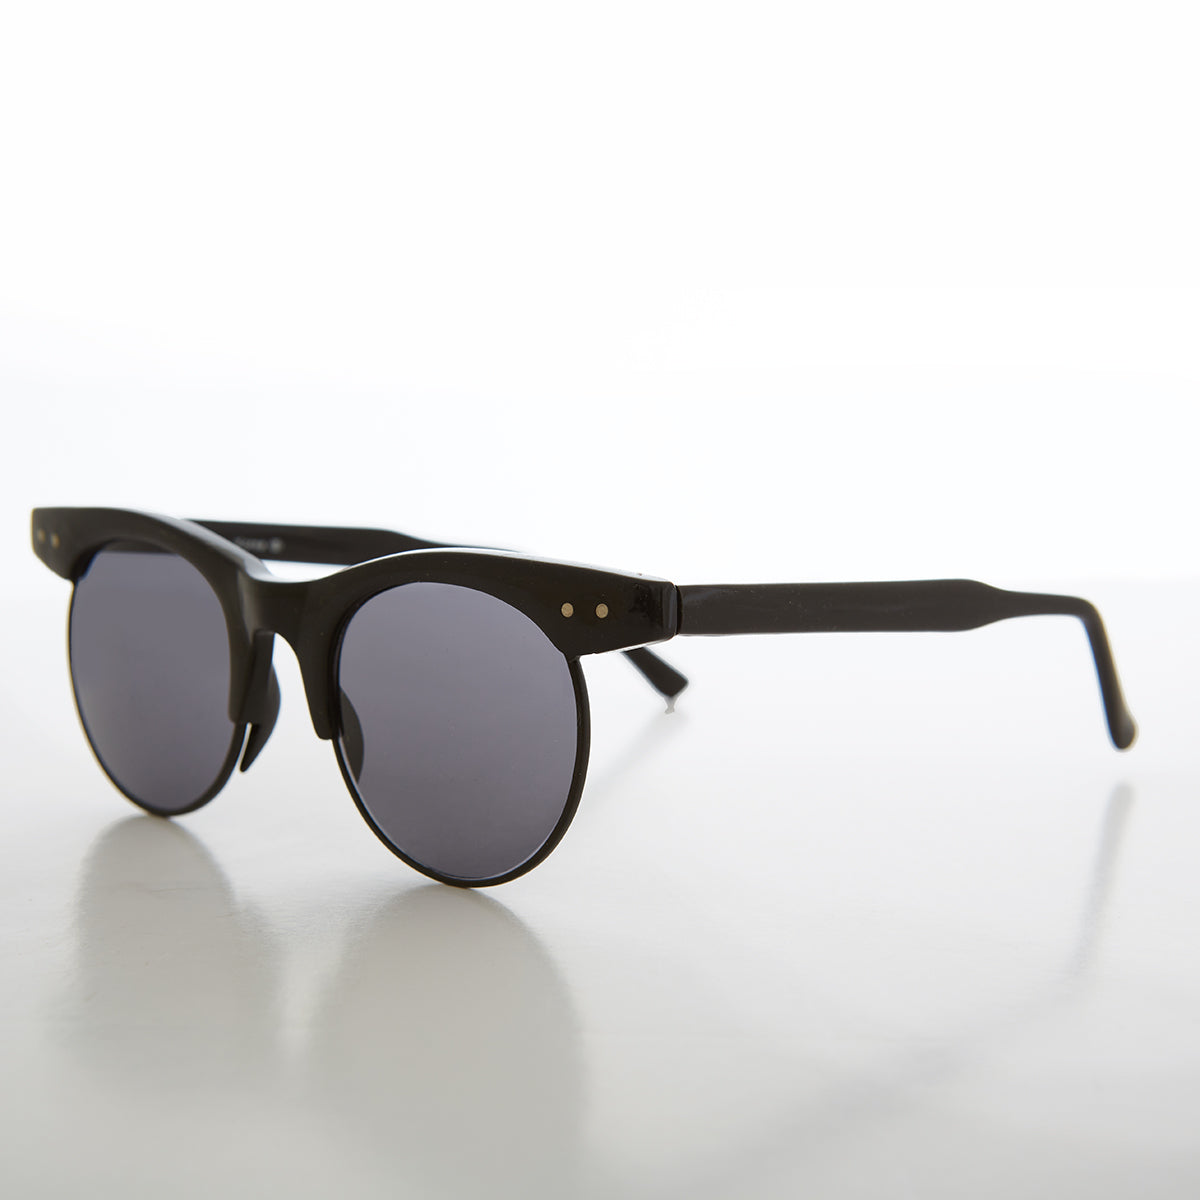 Round Extended Horn Rim Vintage Sunglass